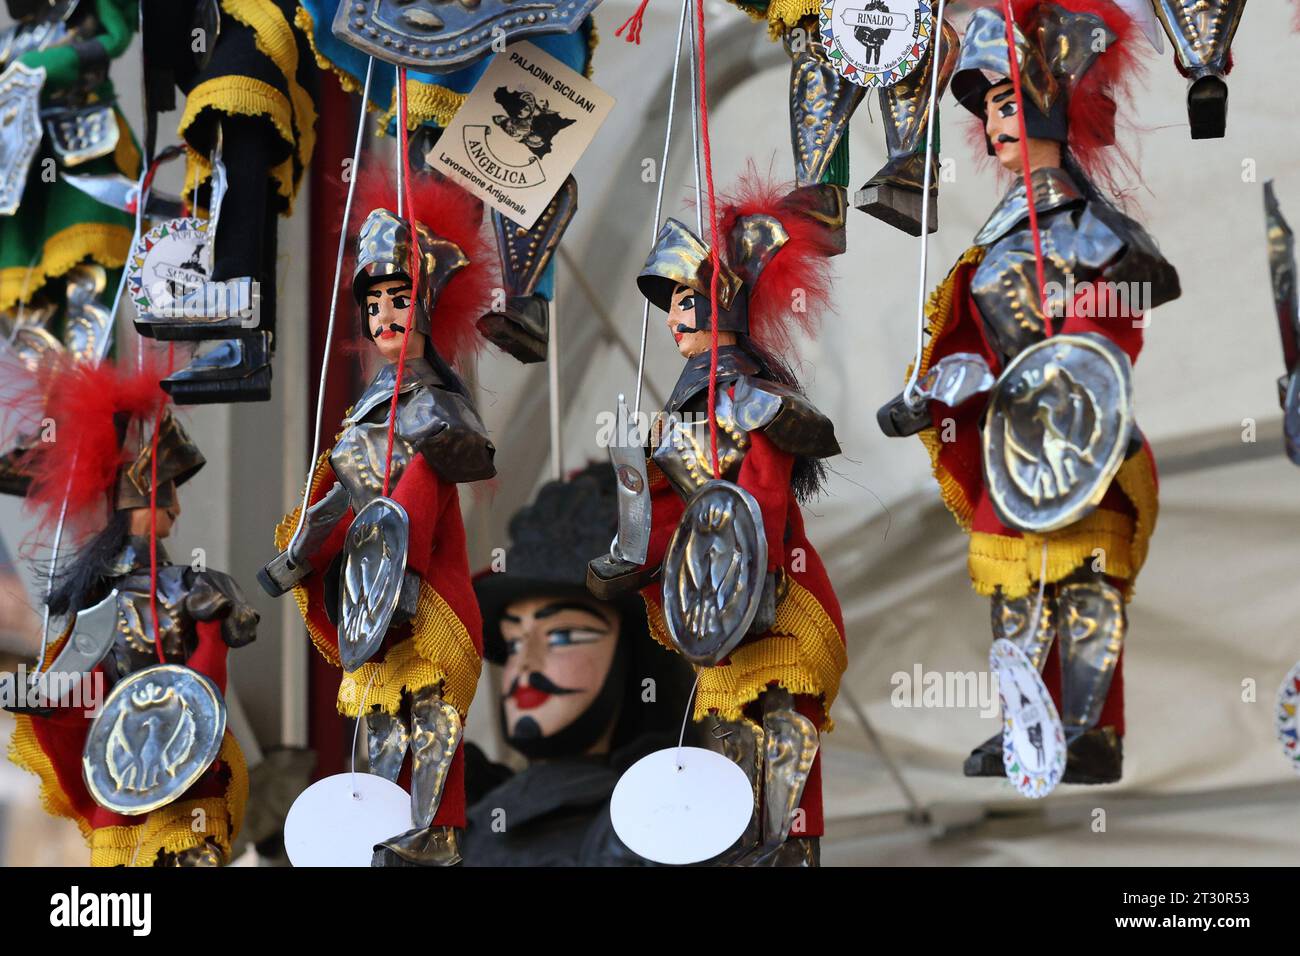 Puppets for sale in the Ballaro district of Palermo, Sicily Stock Photo